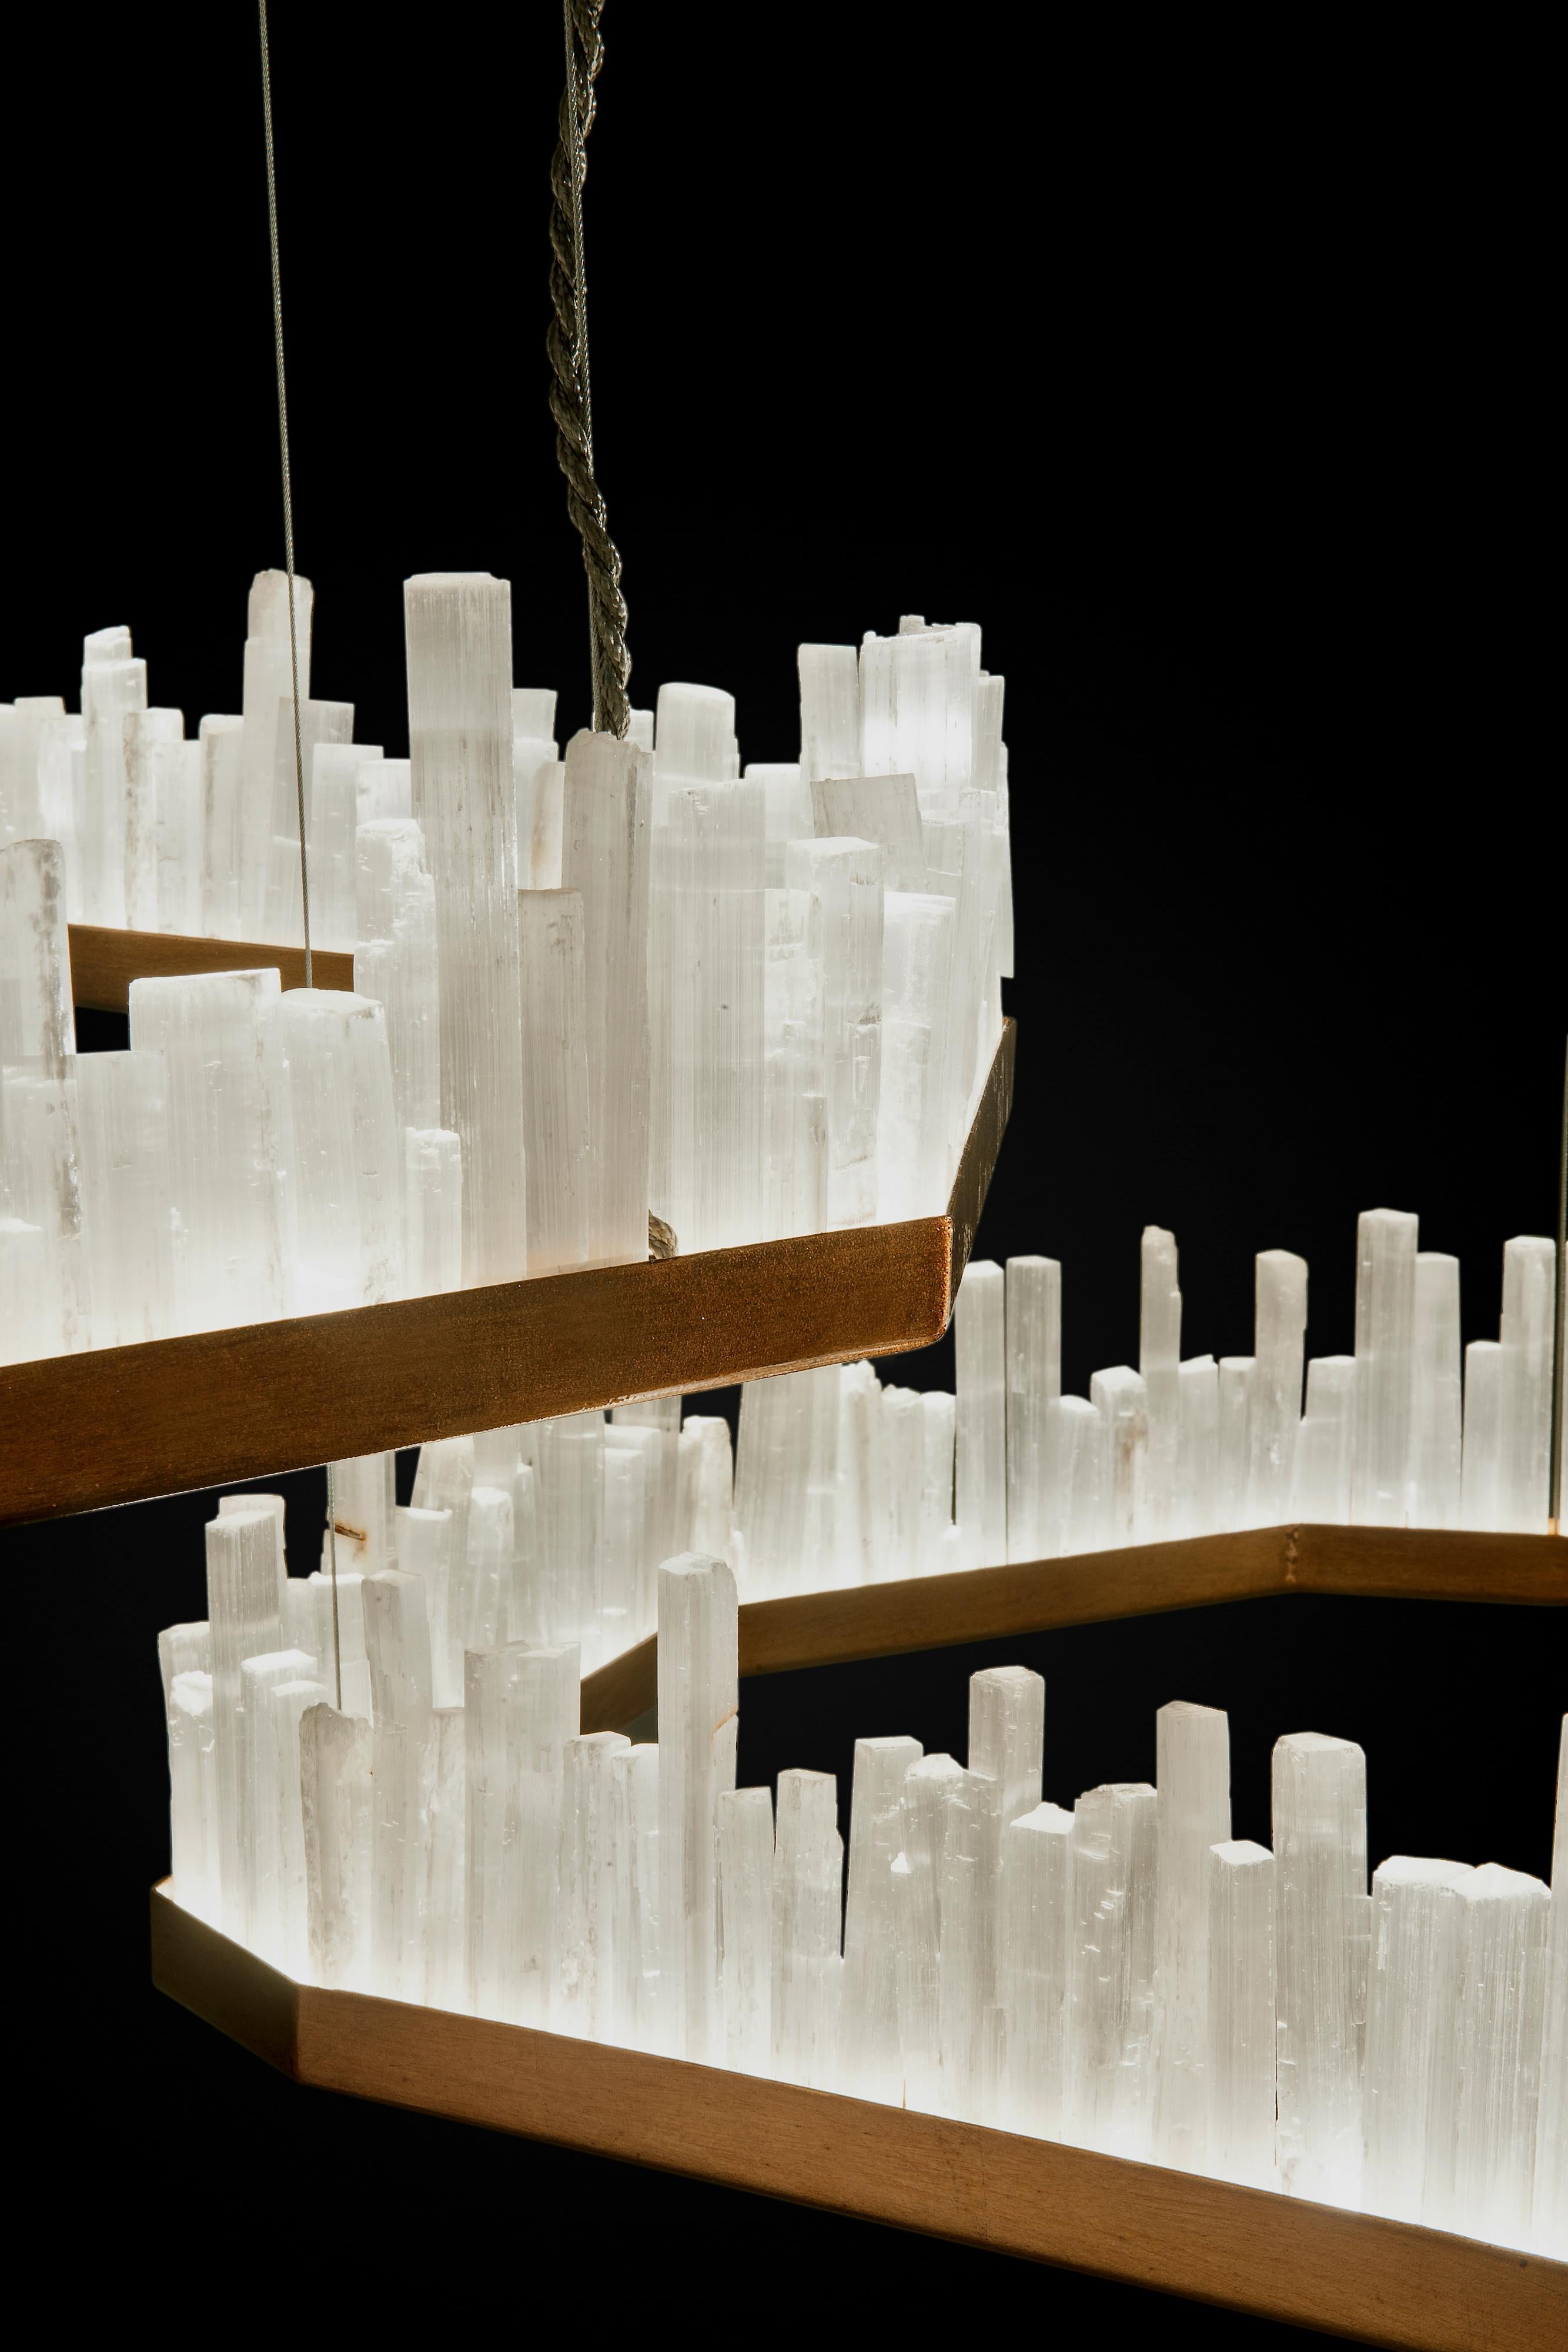 Pair of Downtowns, Natural Selenite Pendant Lamps
Dimensions: 81 x 81 x 18 cm
Lighting: One led 28W / 1800 Lumens
Finish: Silver leaf, old silver leaf, gold leaf, old gold leaf, copper leaf, rusty, pink golf and brass.
Natural Selenite Stone